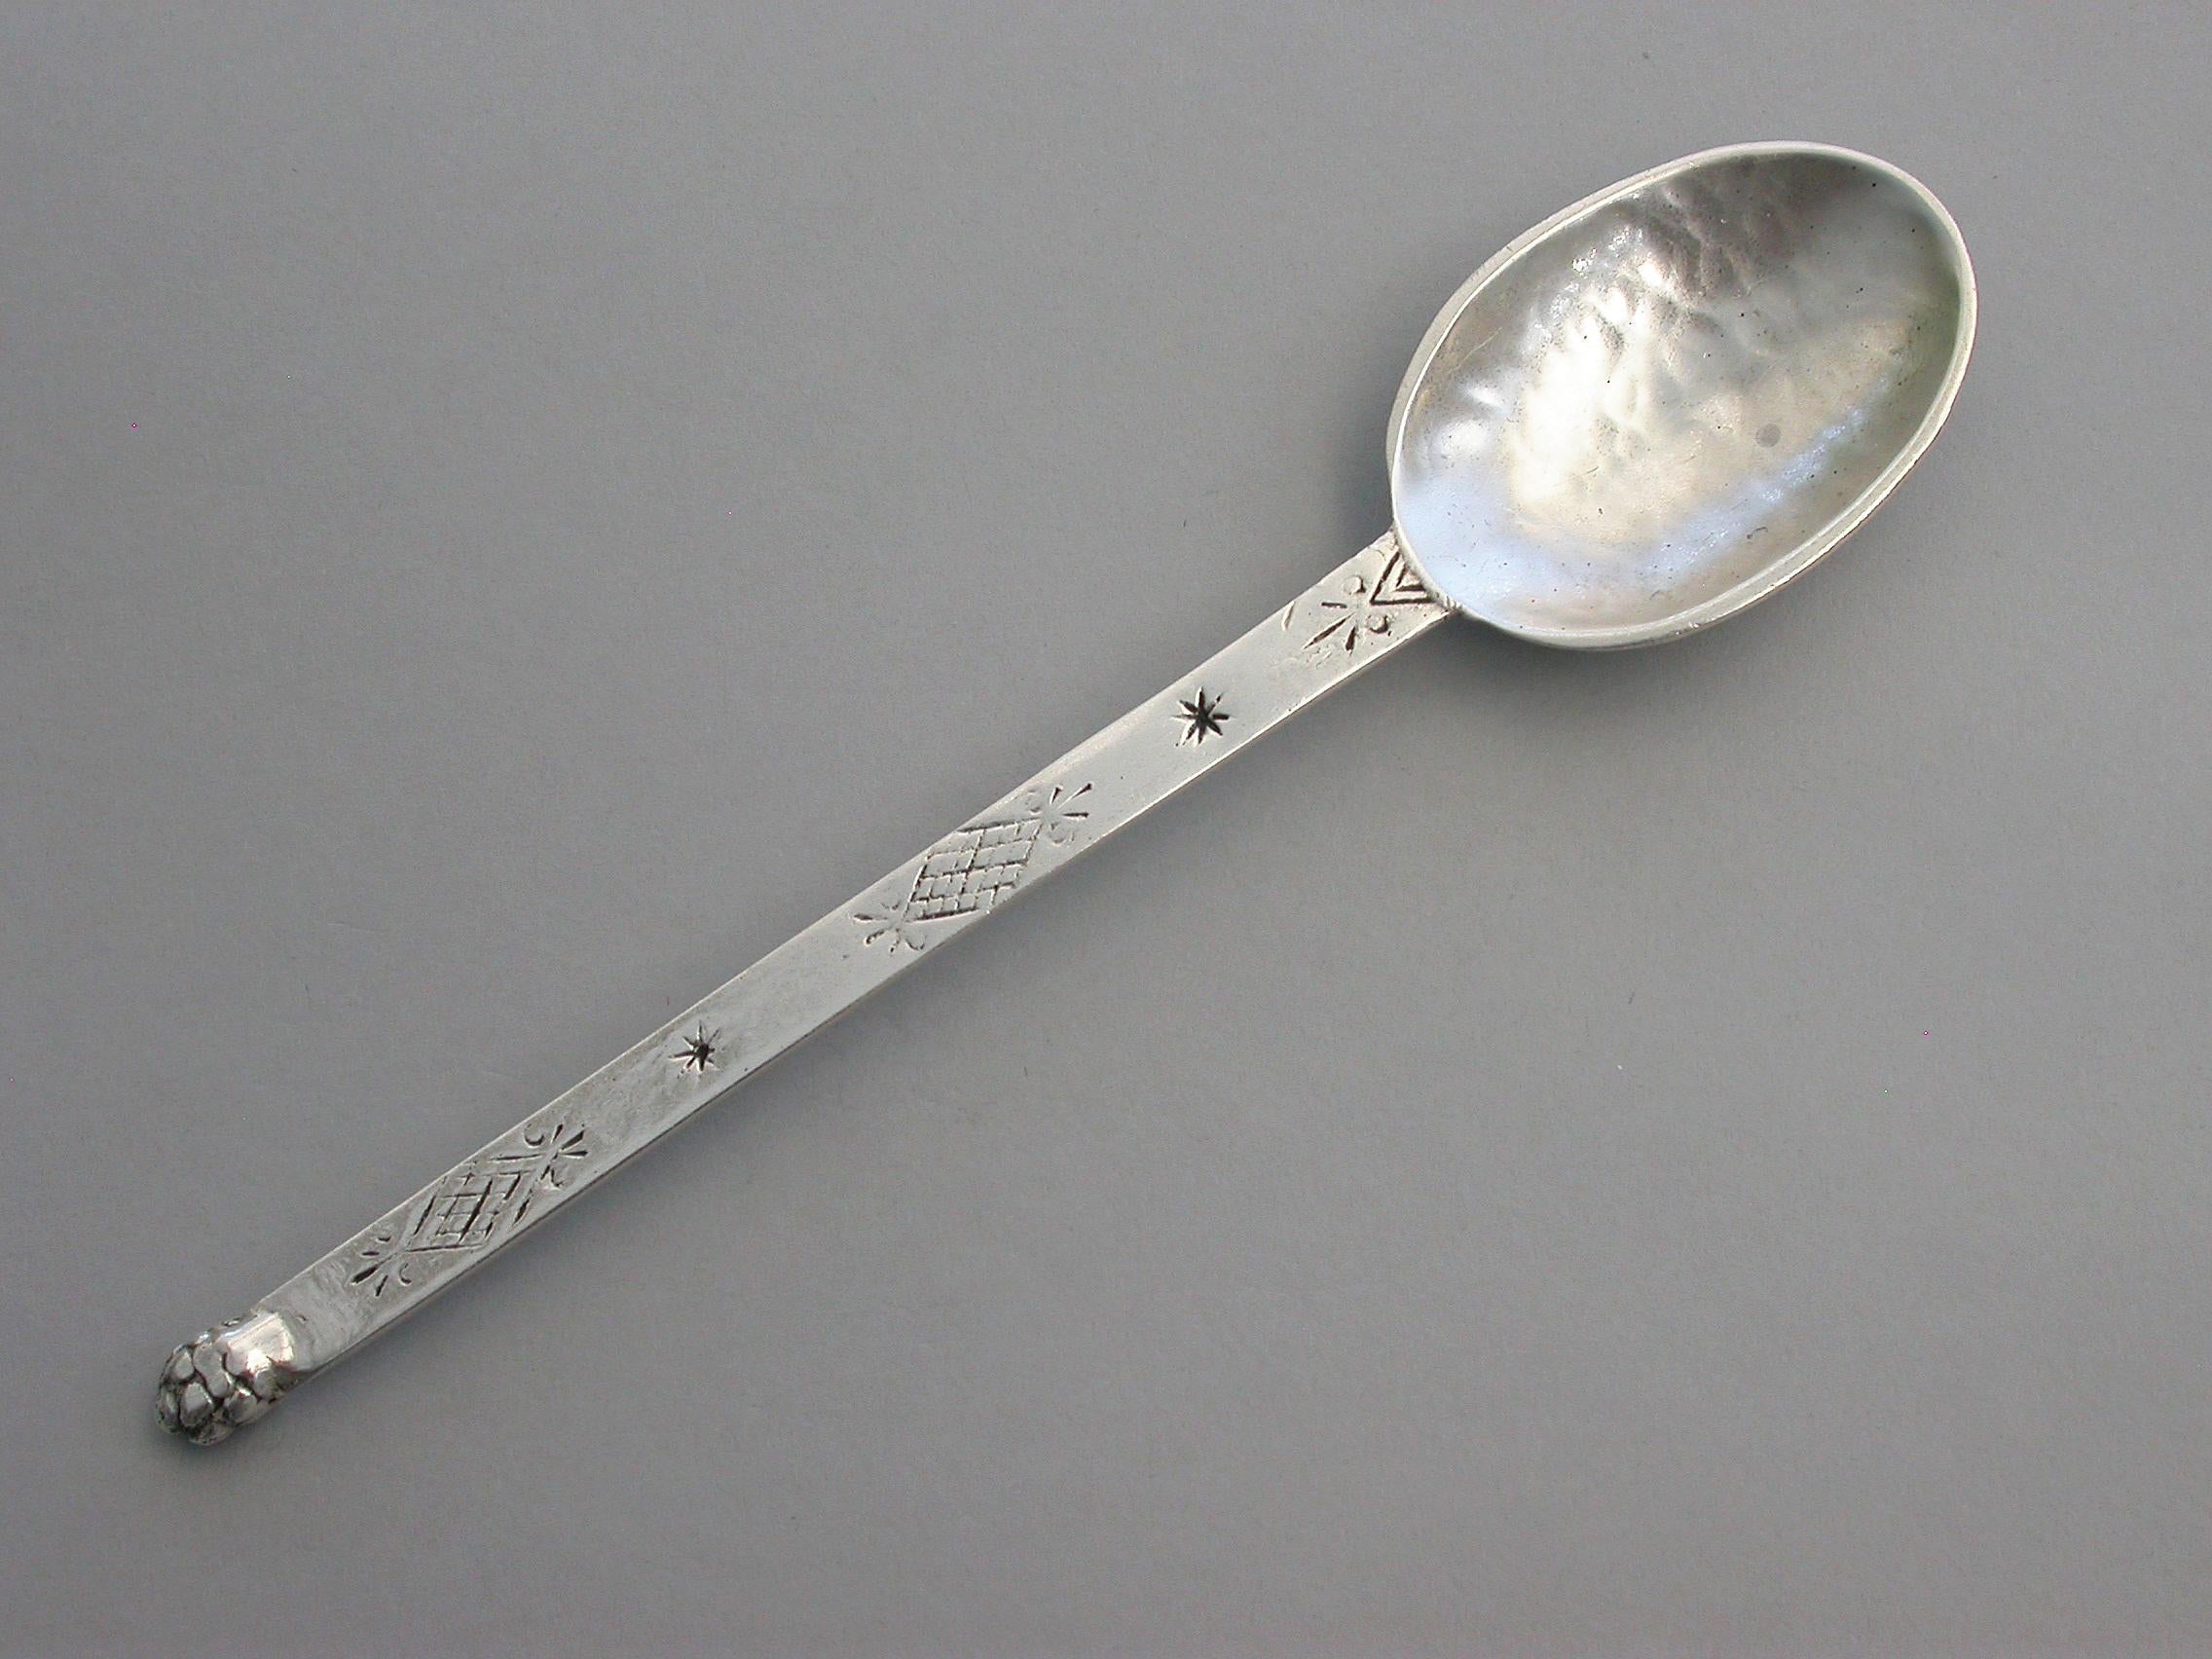 Arts and Crafts Arts & Crafts Hammered Silver Spoon by Francis Harling, London, 1926